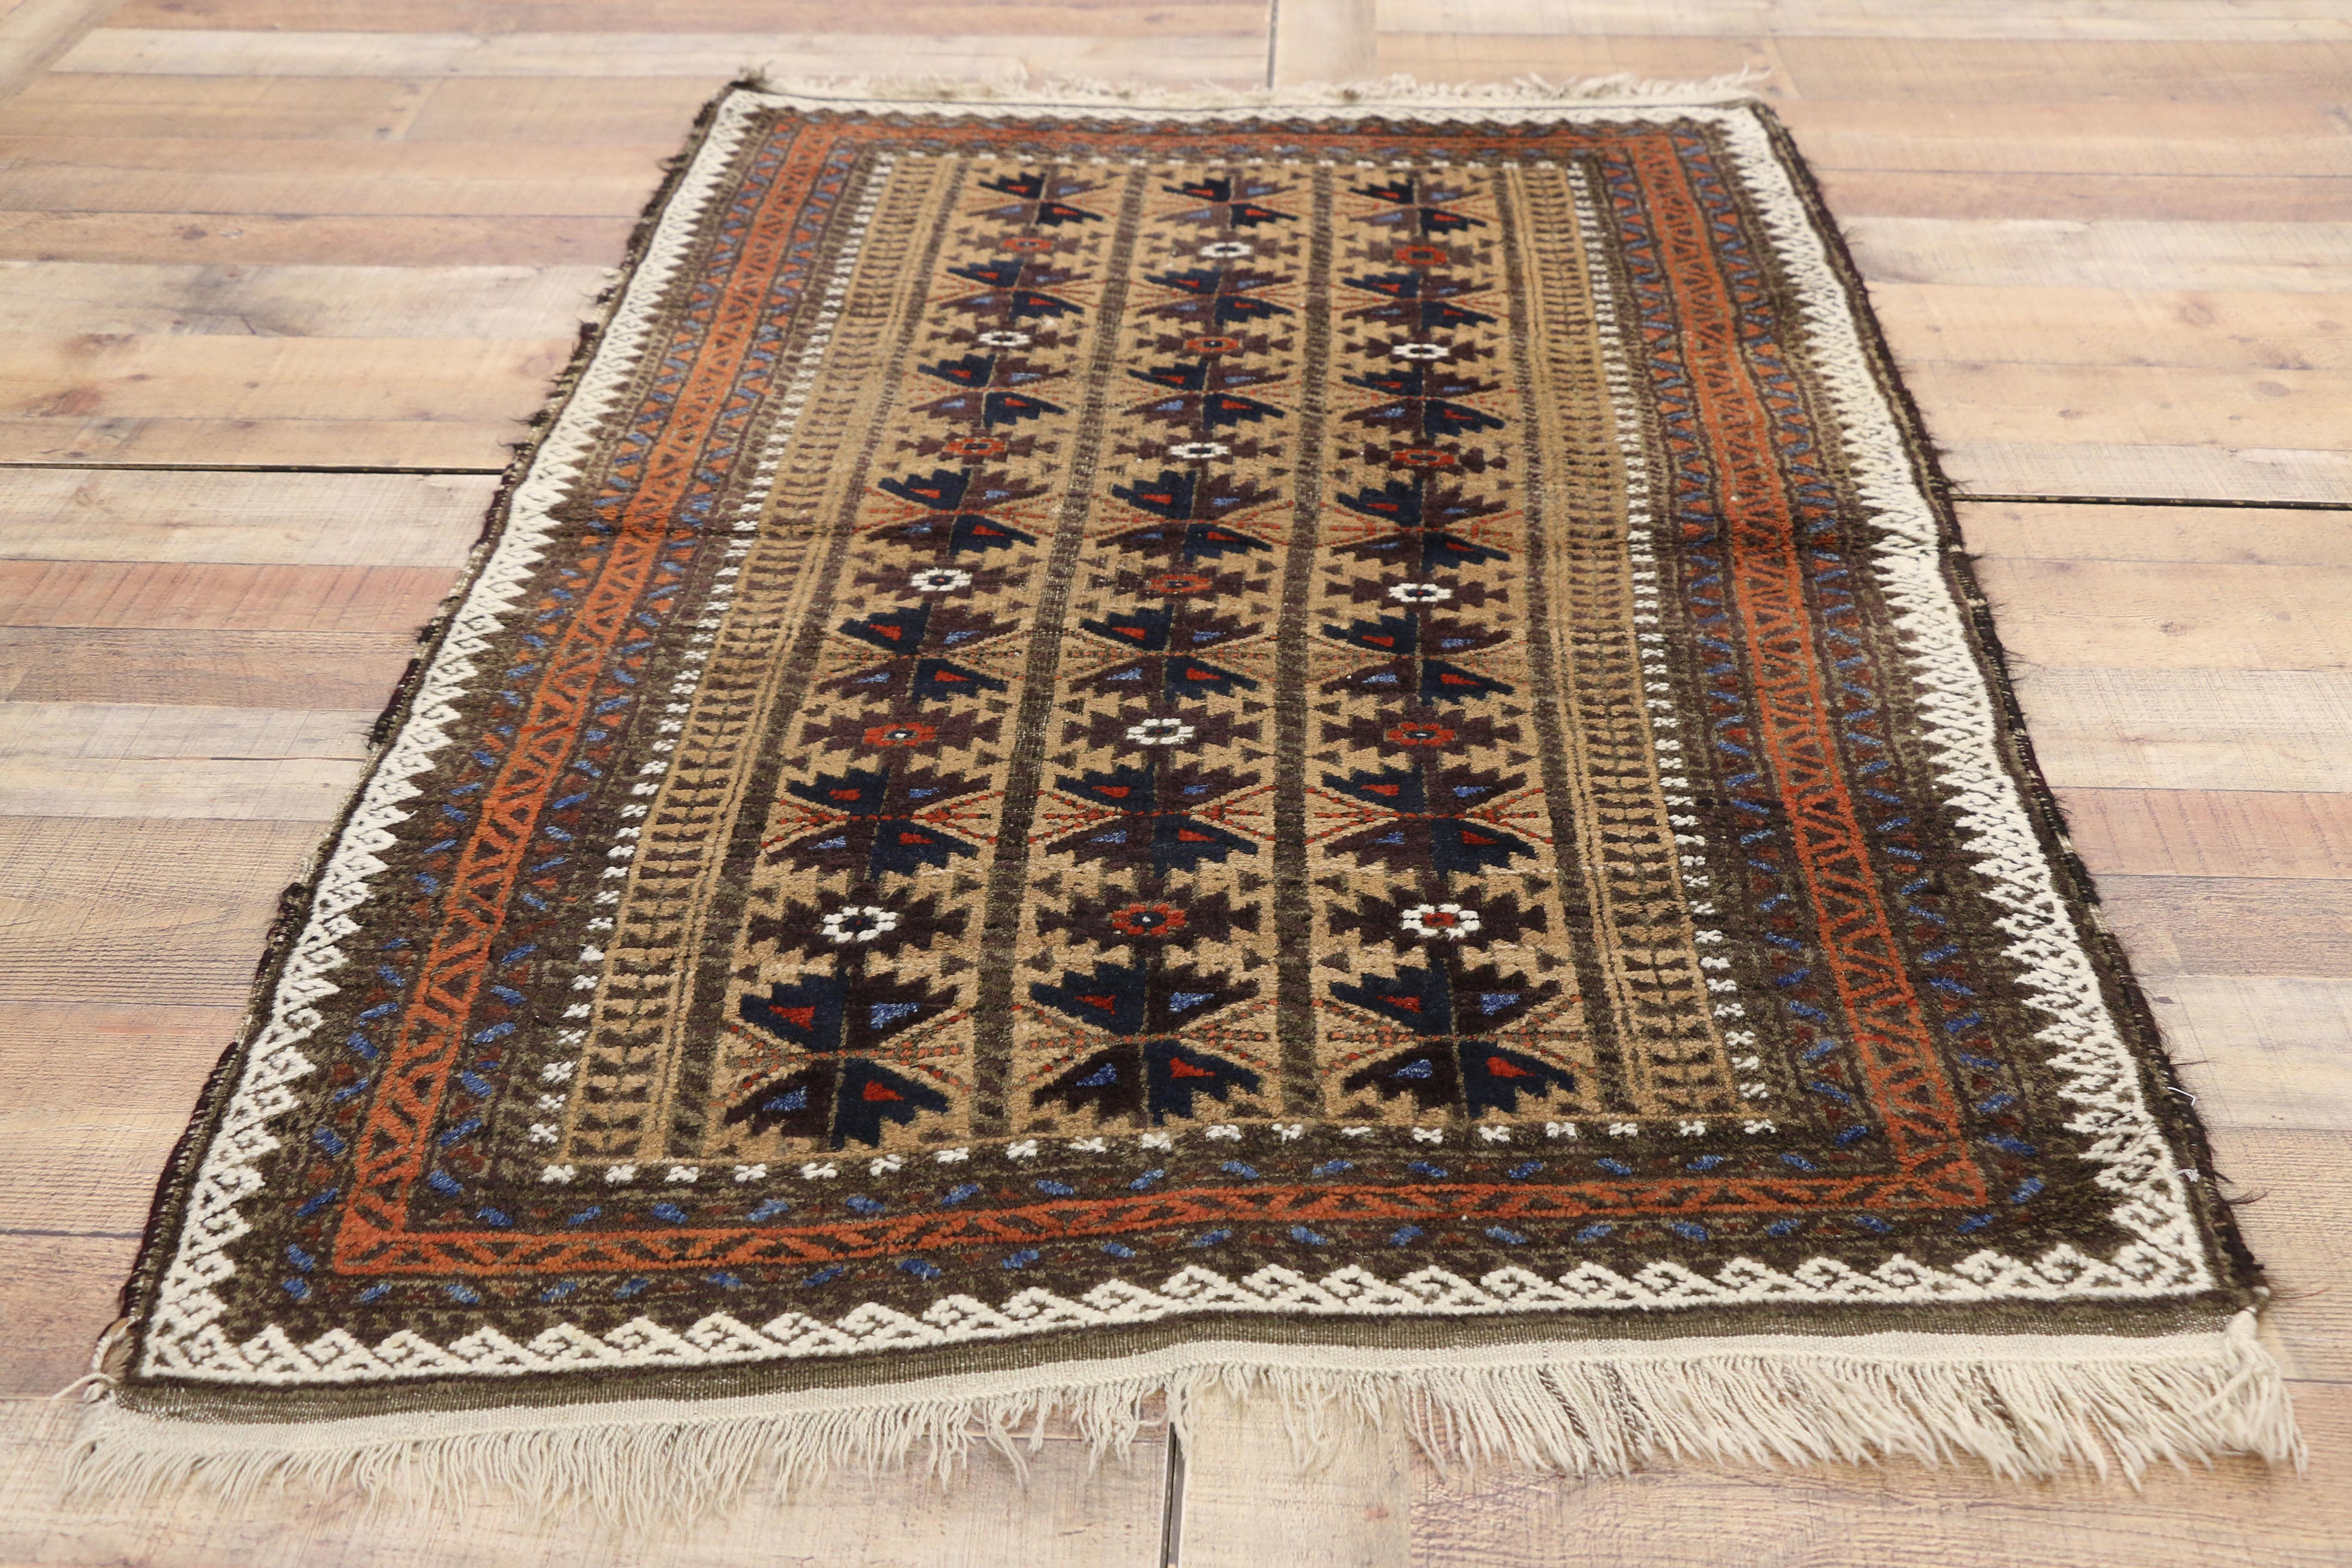 Antique Persian Arab Baluch Tree of Life Rug, Tribal Style Entry or Foyer Rug In Good Condition For Sale In Dallas, TX